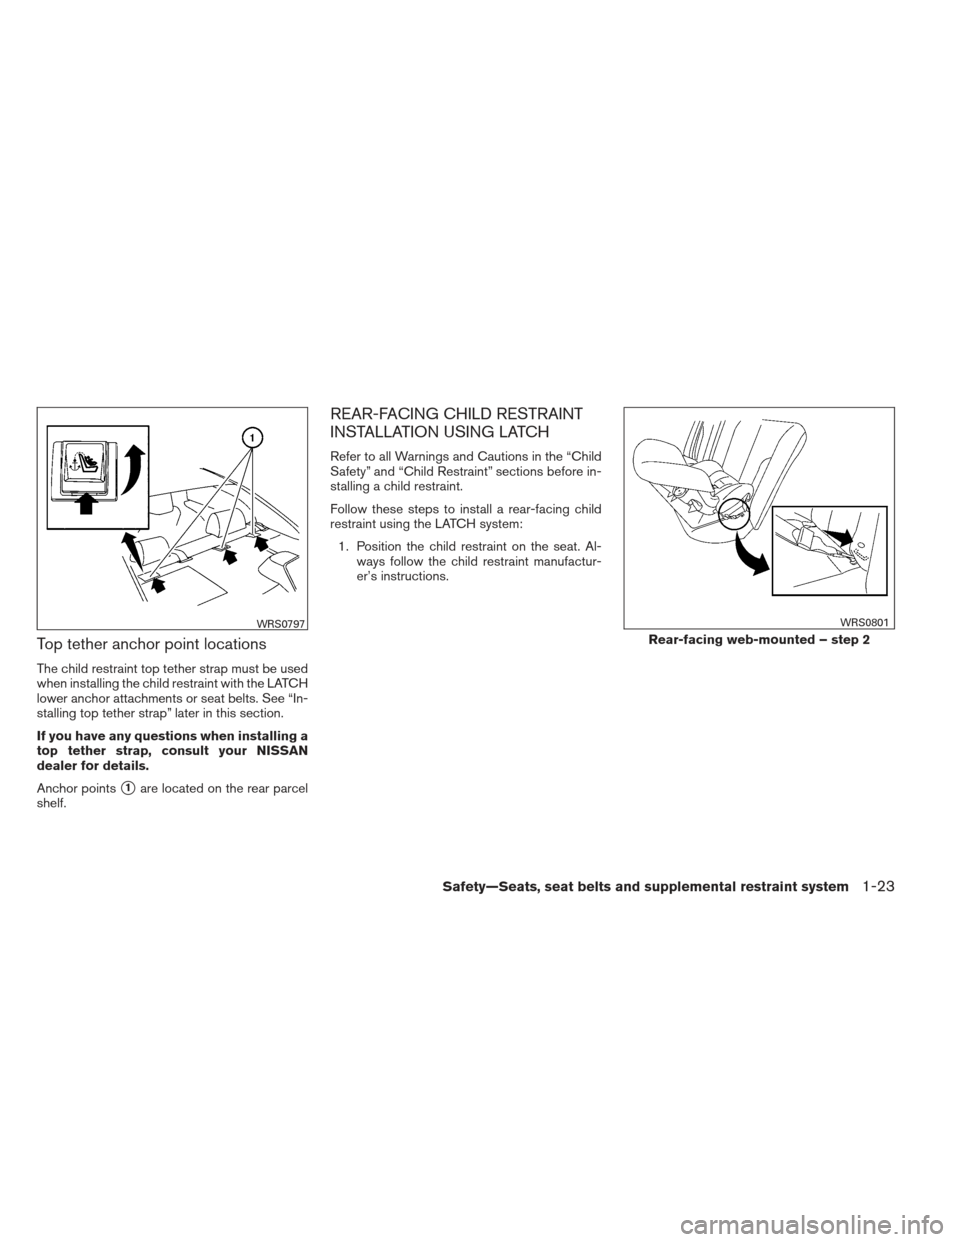 NISSAN ALTIMA 2013 L33 / 5.G Owners Guide Top tether anchor point locations
The child restraint top tether strap must be used
when installing the child restraint with the LATCH
lower anchor attachments or seat belts. See “In-
stalling top t